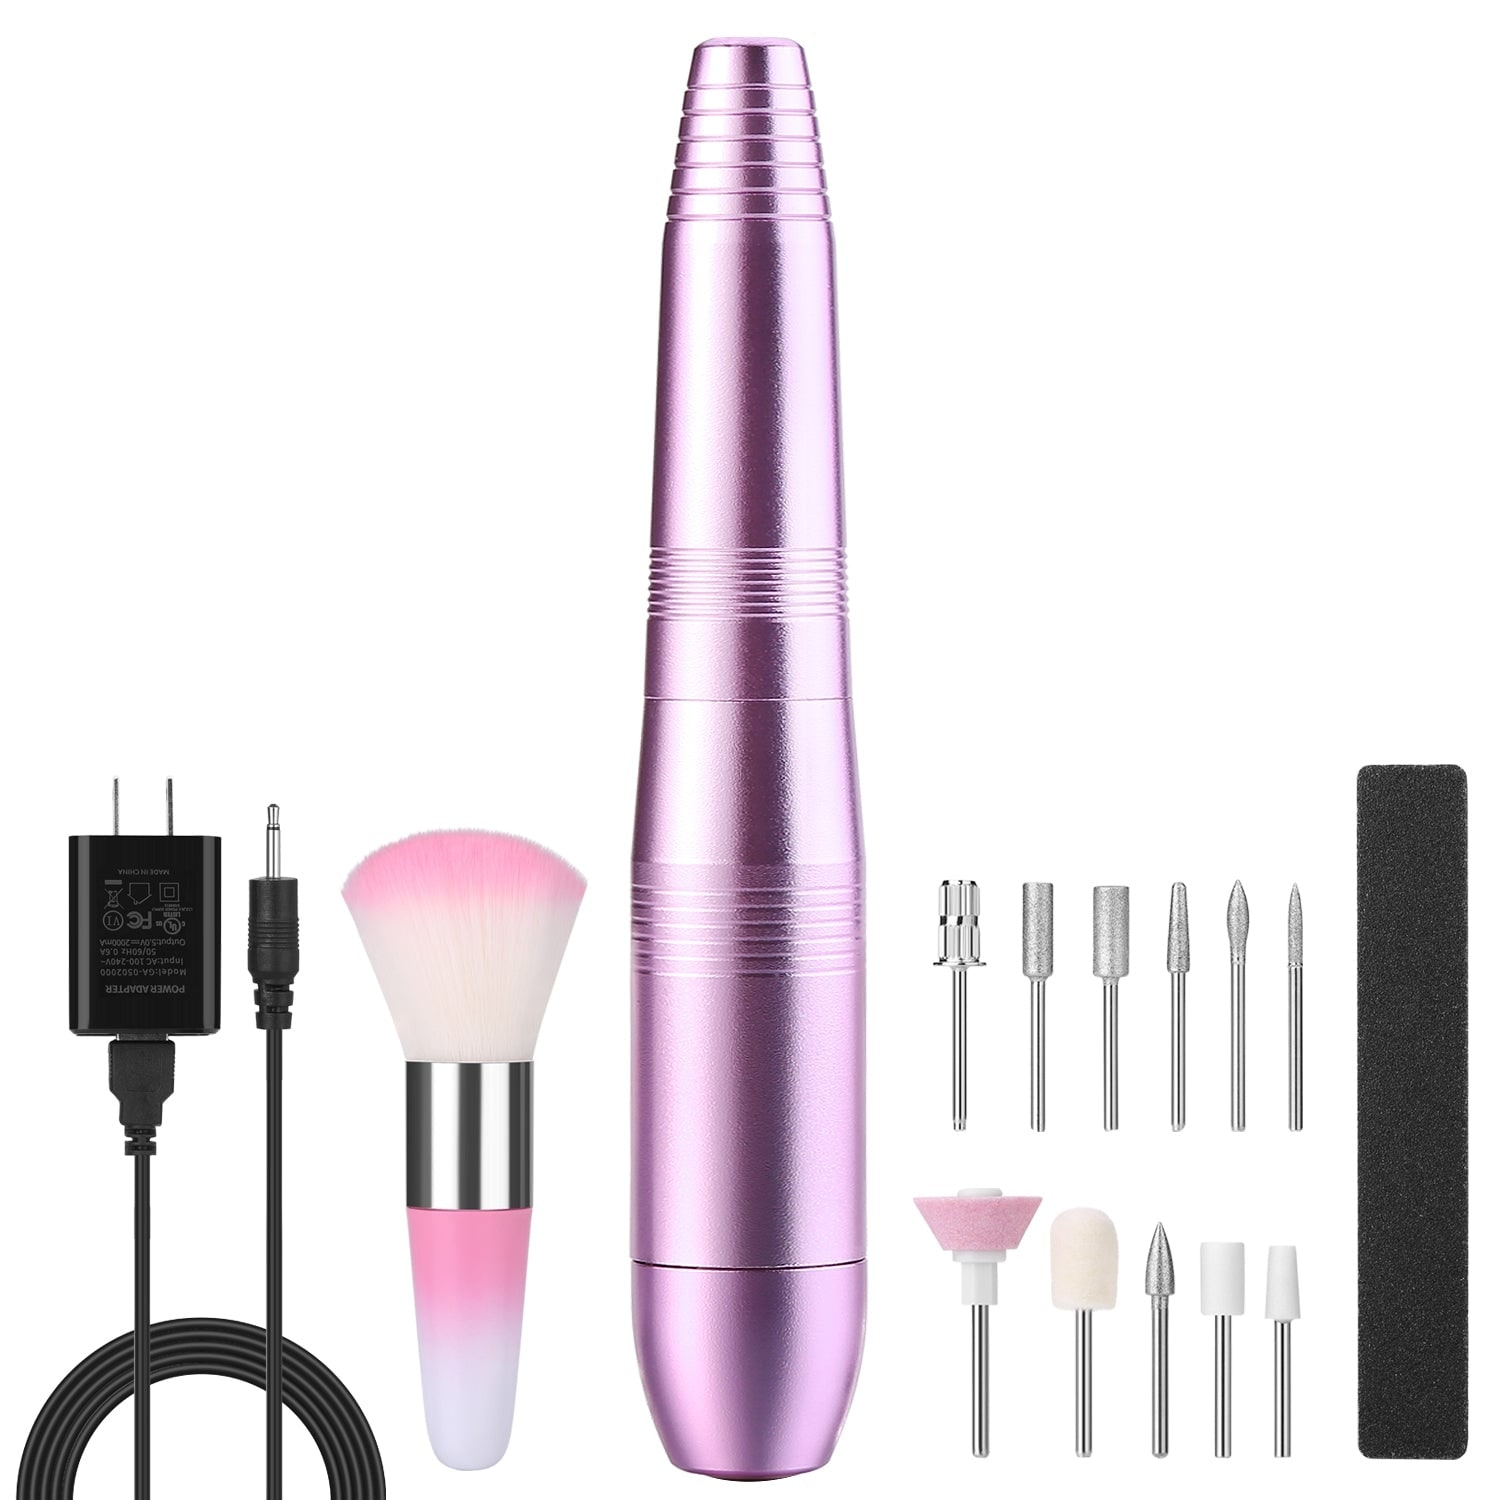 Bestidy Nail Drill Machine,30000rpm Professional Rechargeable Nail Drill  Kit with Phone Power Bank Portable Electric Acrylic Nail Tools for  Exfoliating,Grinding… | Nail drill machine, Nail drill, Acrylic nail drill